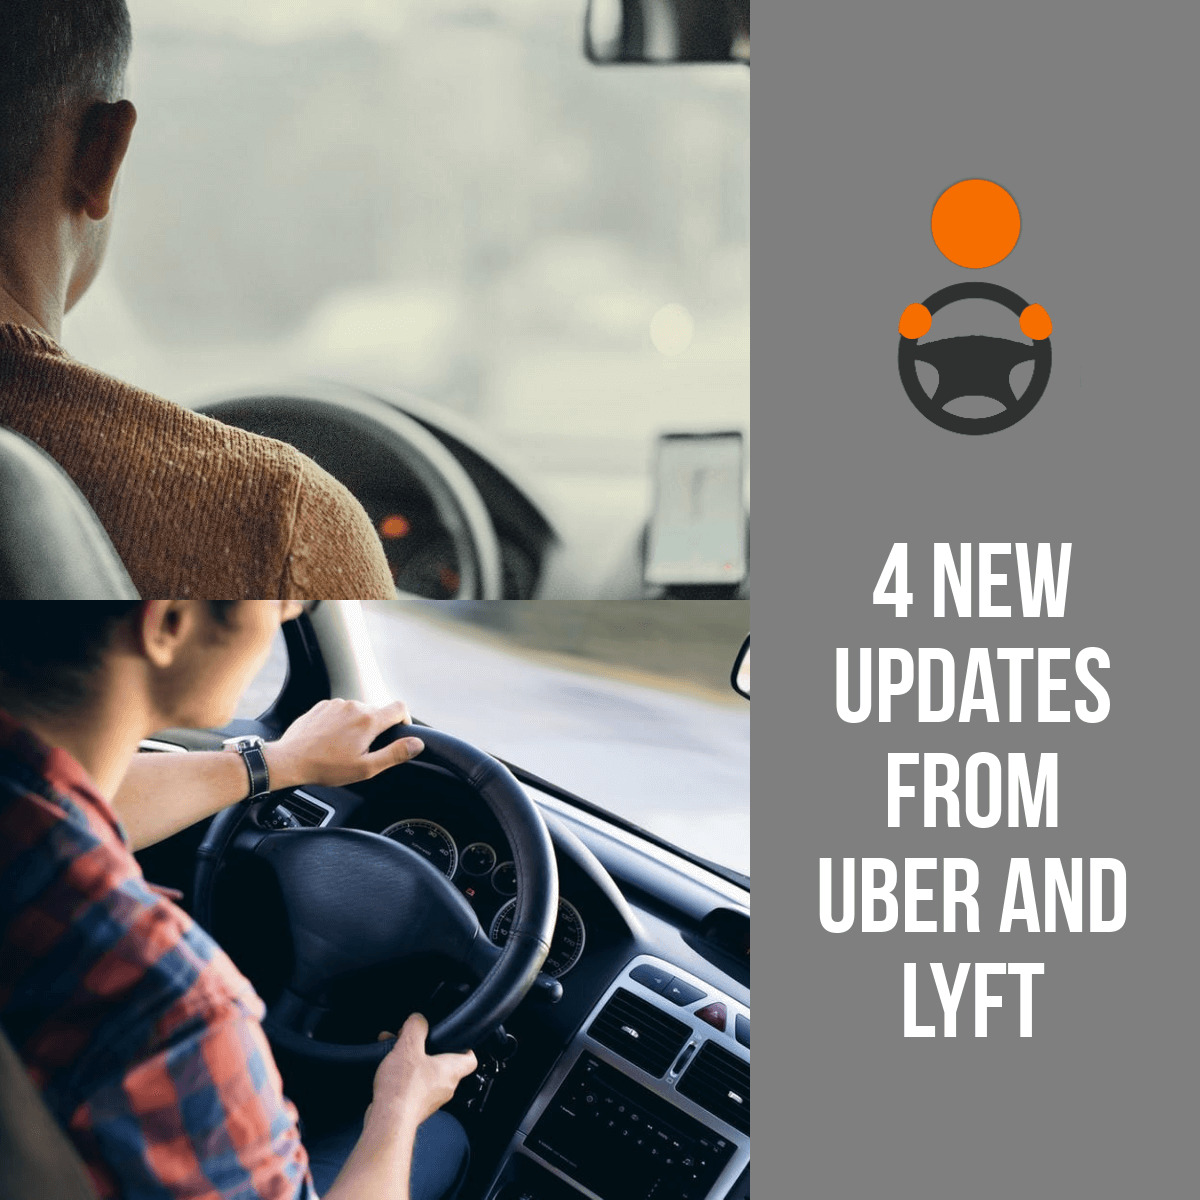 In certain markets, Uber and Lyft have been making changes from driver pay to how surge pricing is shown to drivers. If you're in one of those markets, you may have noticed the changes. If not, the changes may be rolling out soon to you! Today, senior RSG contributor Christian Perea gives us an update on all the changes Uber and Lyft are making.